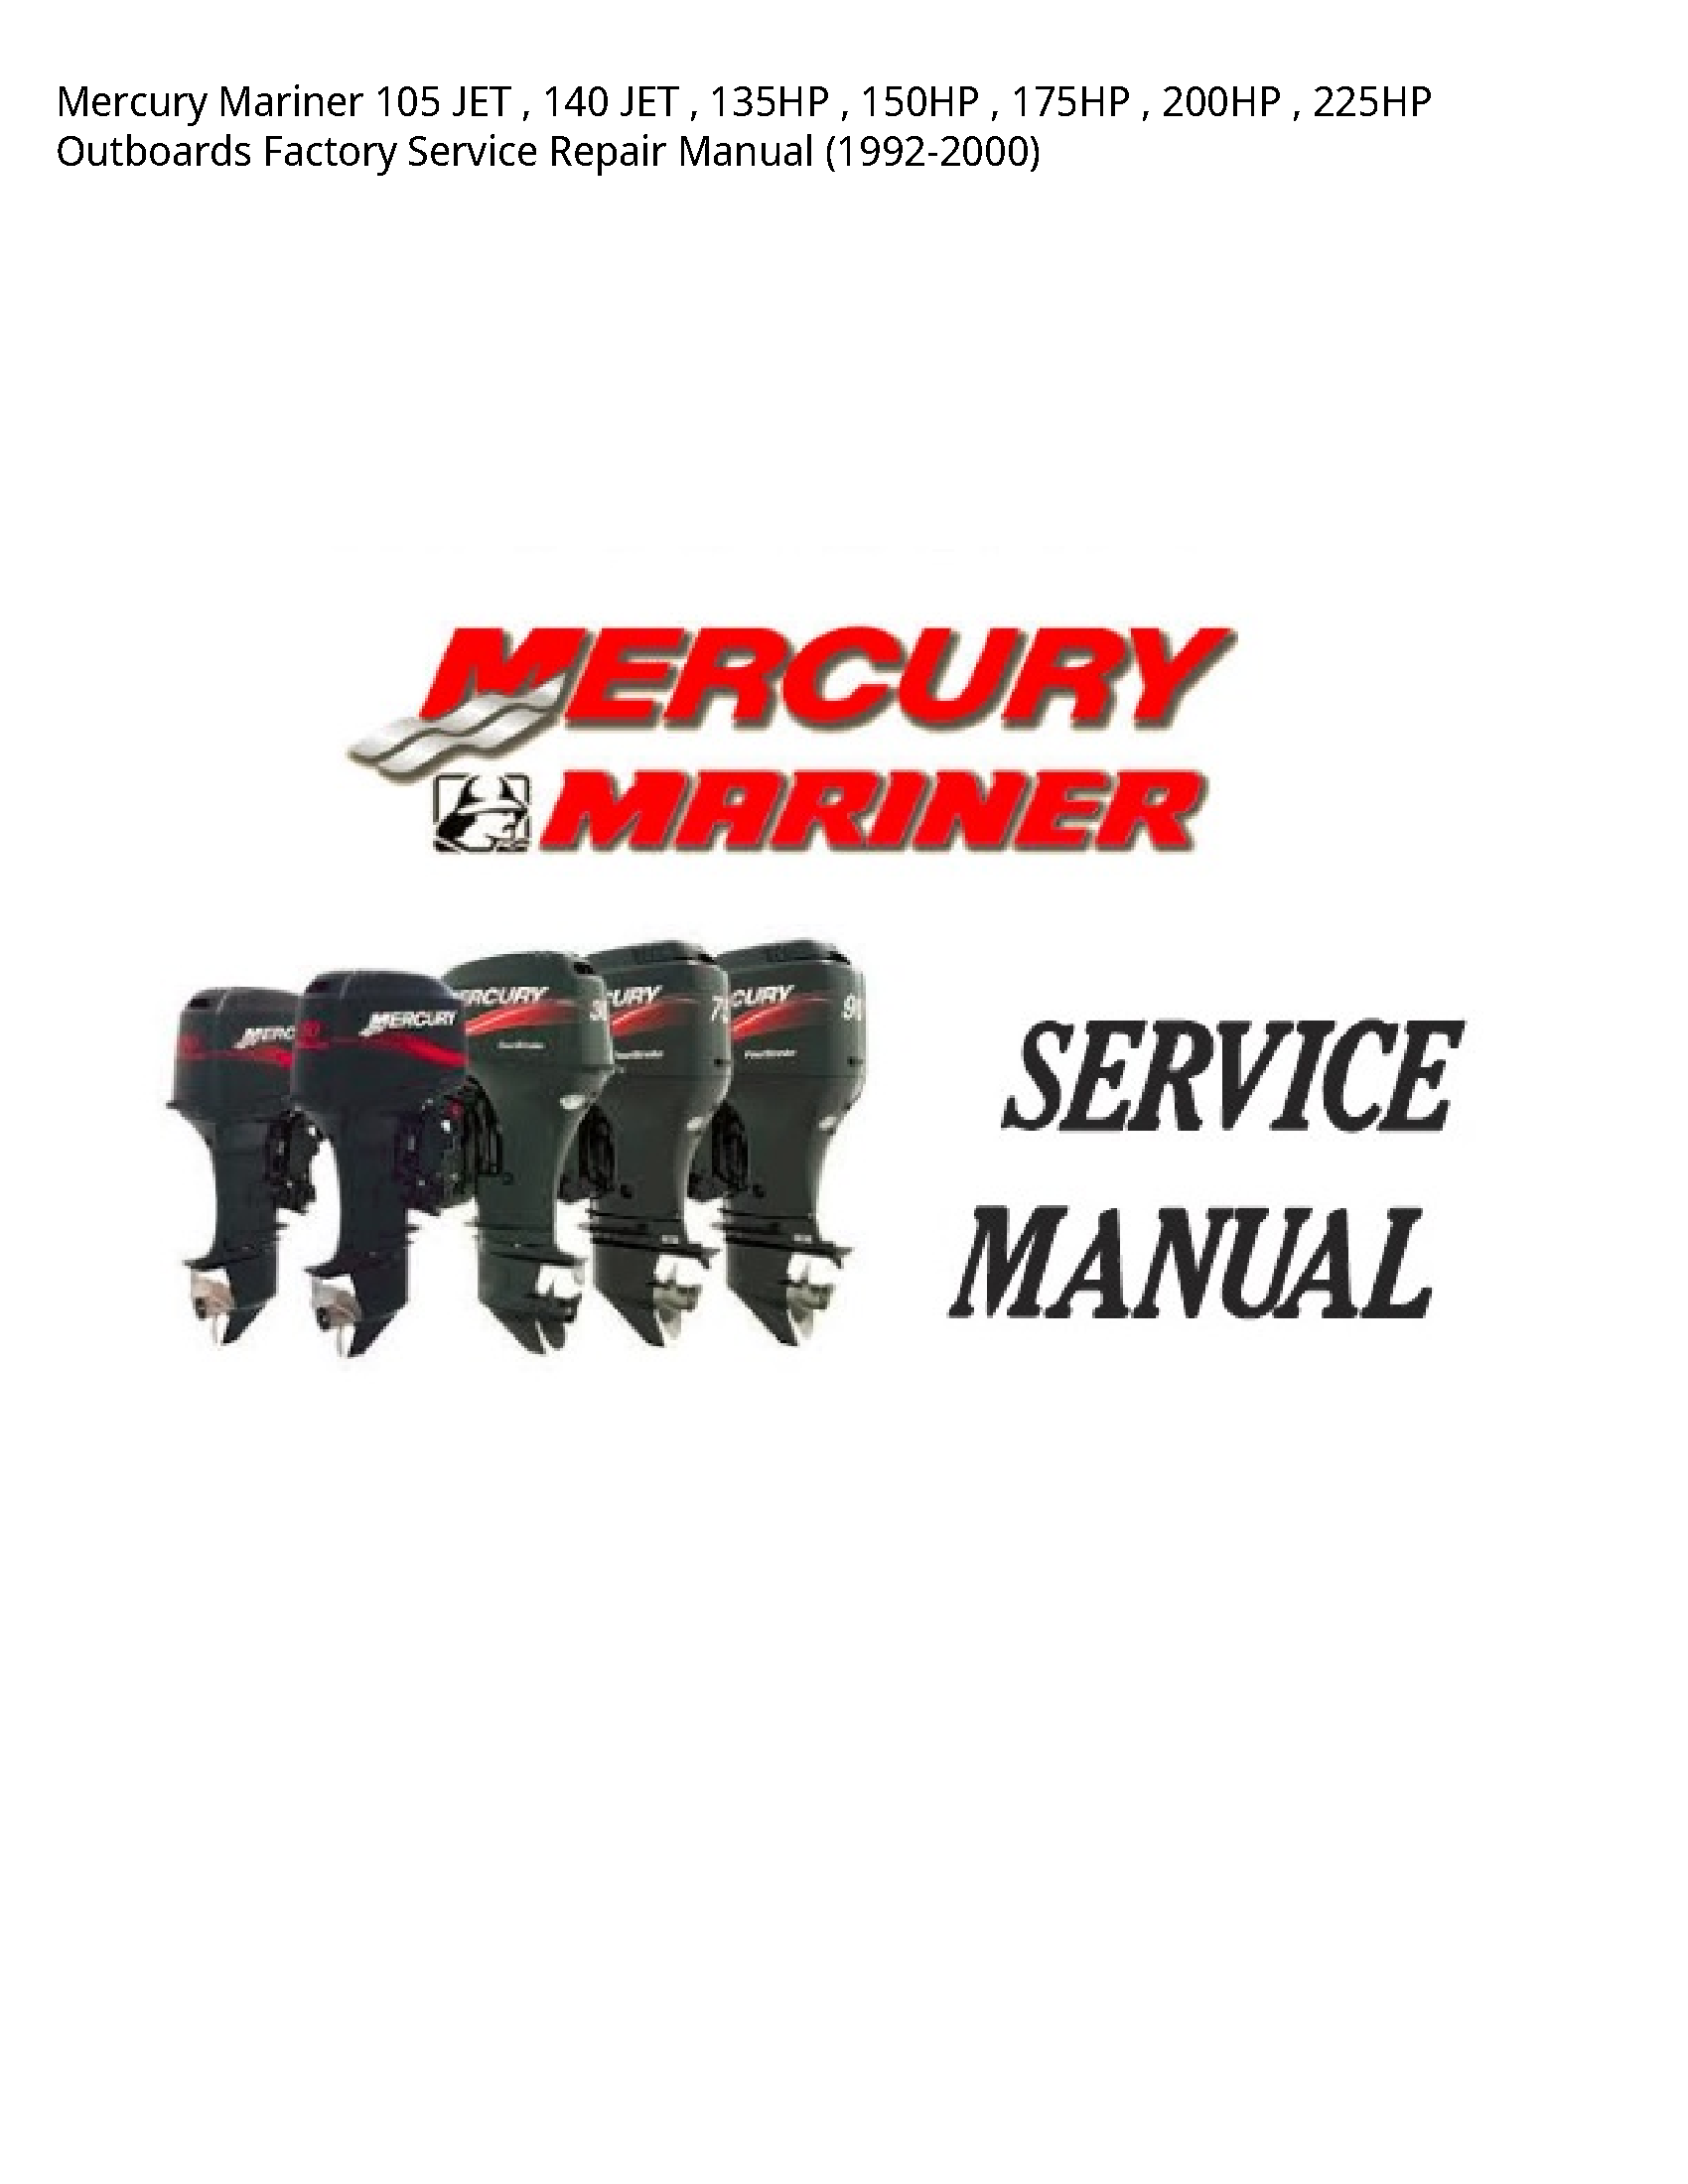 Mercury Mariner 105 JET JET Outboards Factory manual